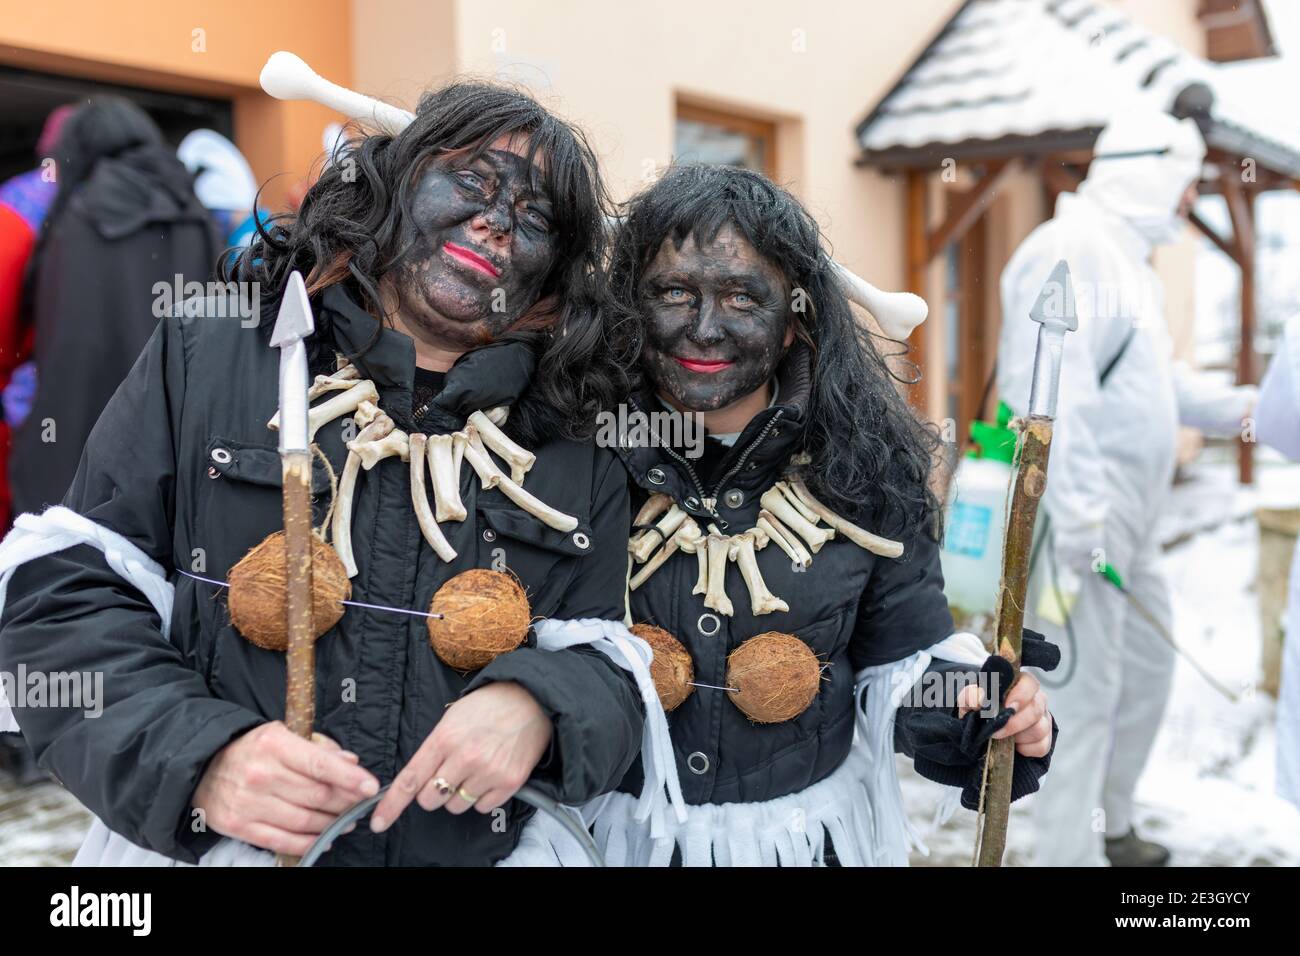 PUKLICE, CZECH REPUBLIC - FEBRUARY 29, 2020: Peoples in mask attend Masopust or the Mardi Gras carnival, traditional ceremonial door-to-door processio Stock Photo